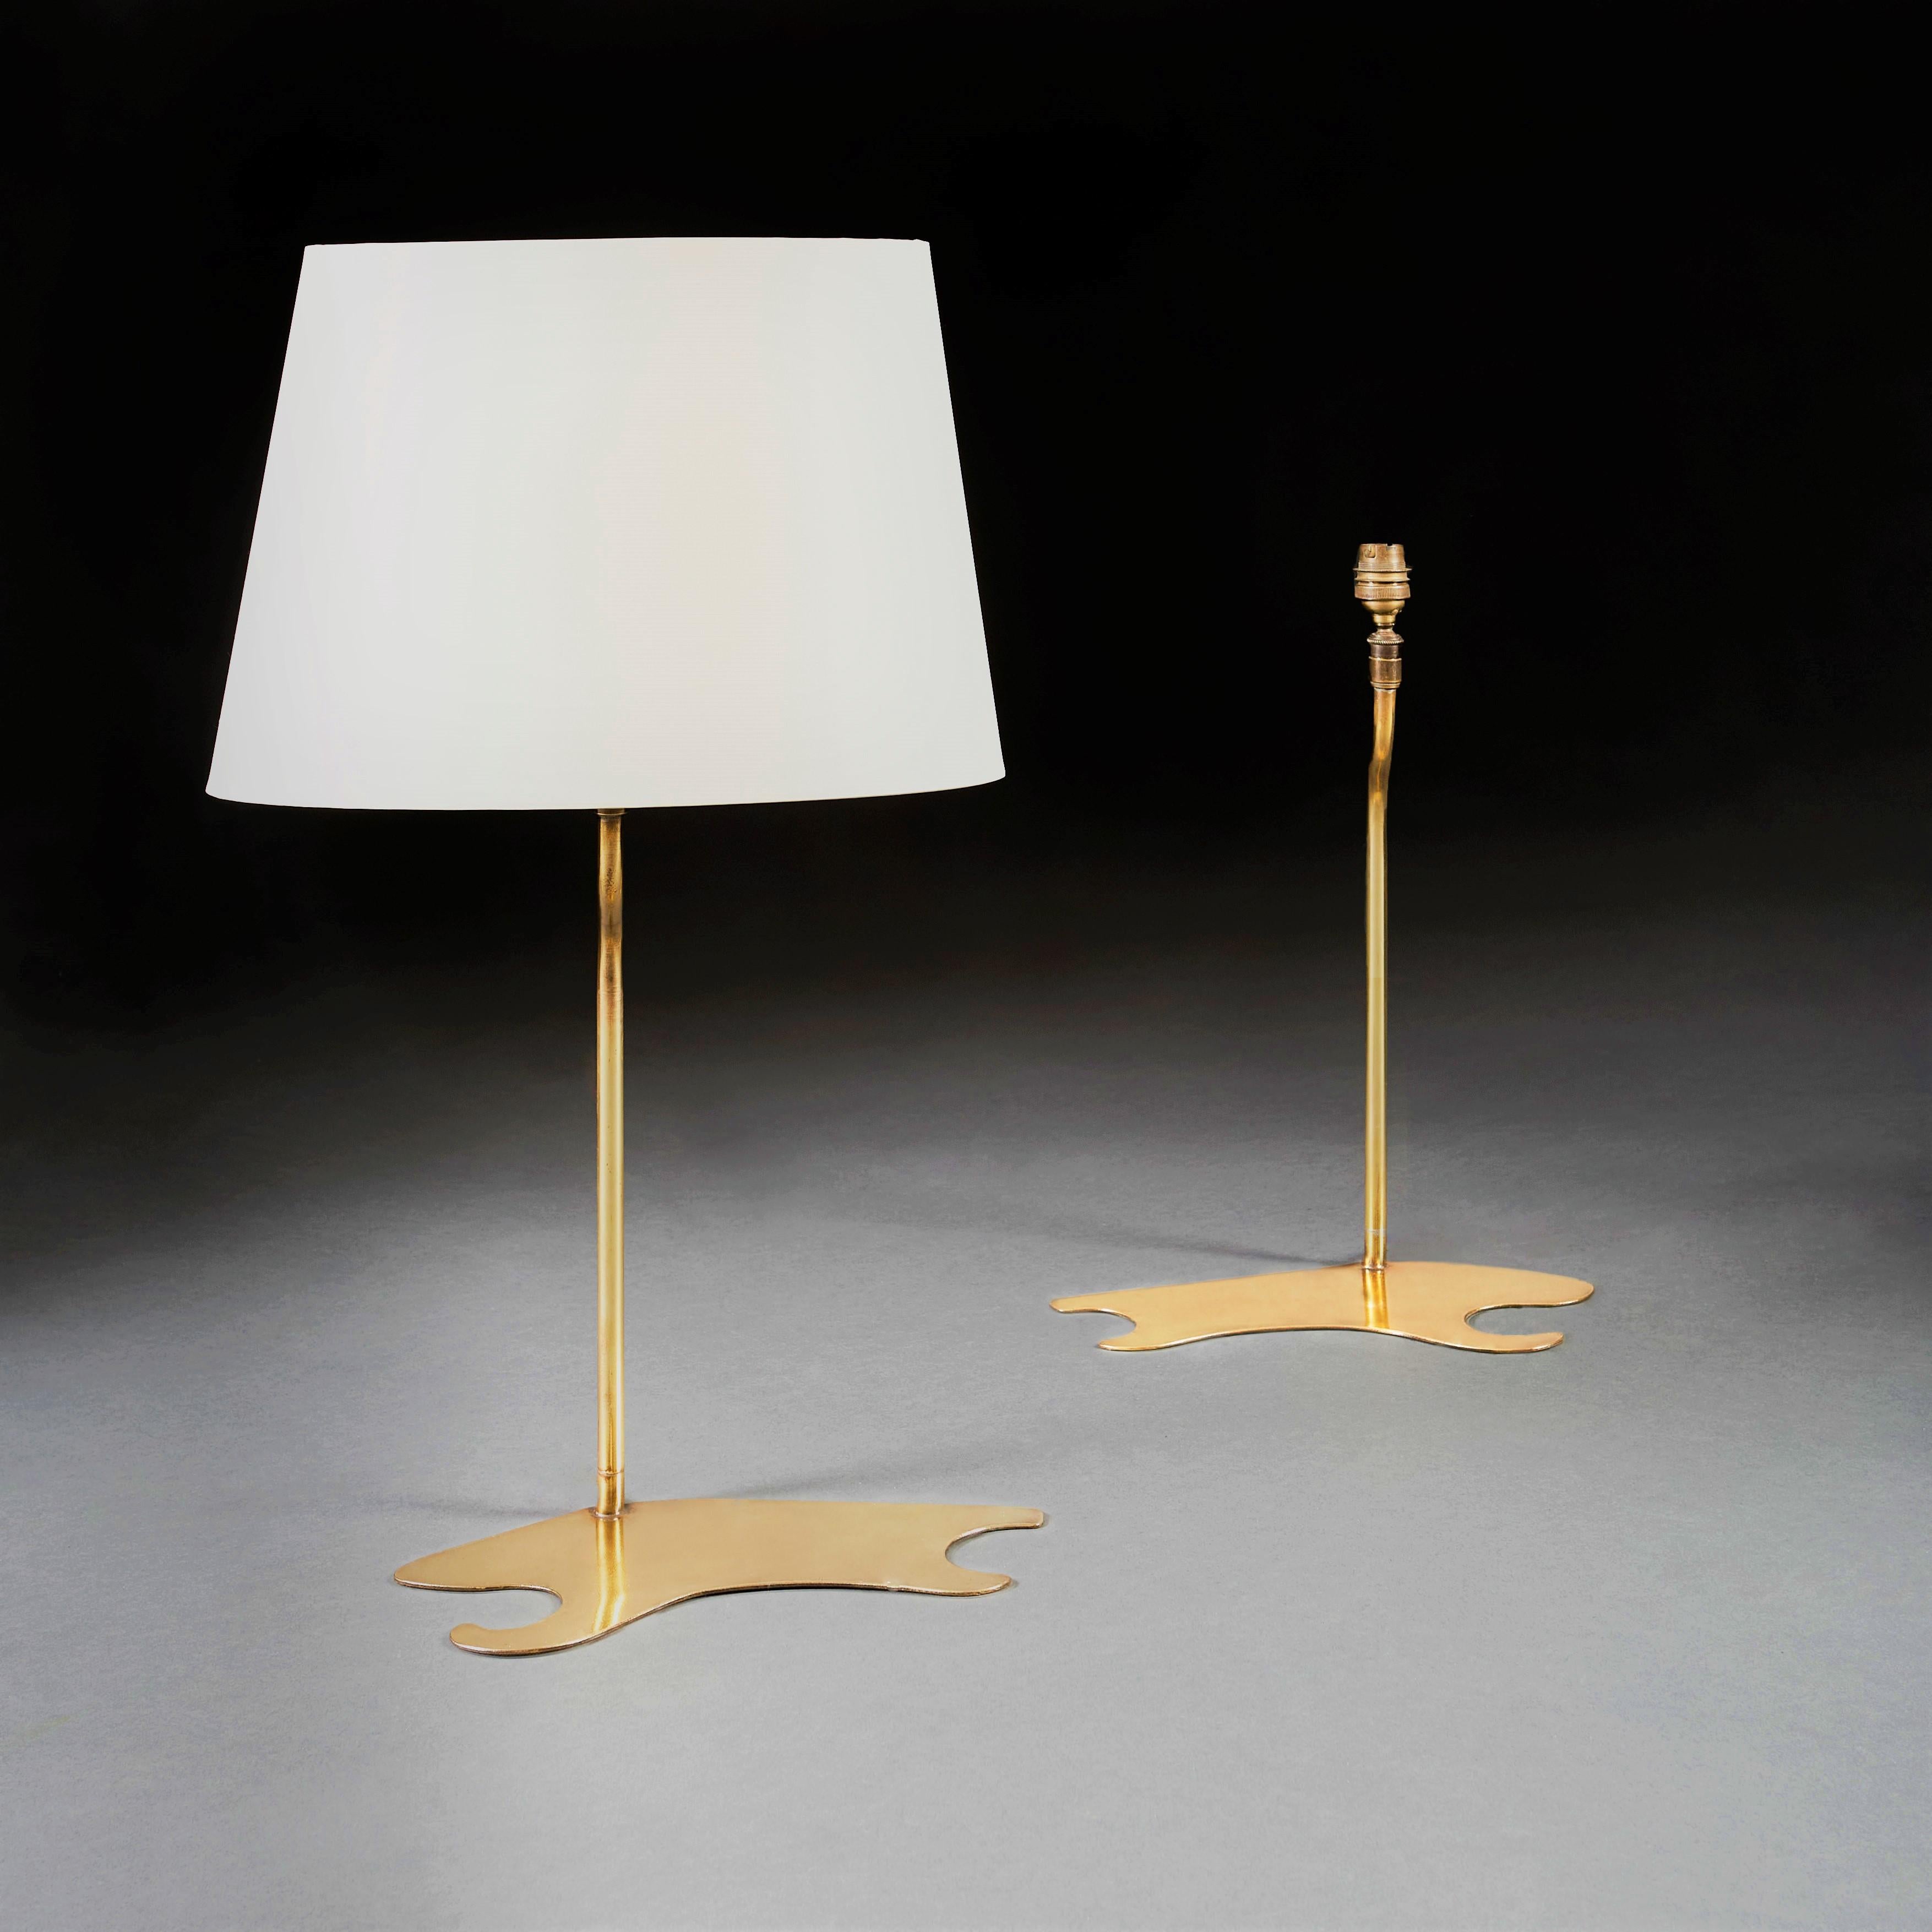 A pair of mid-20th century brass lamps, the bases in the form of a painter’s palette, the stems with an elegant bed to the neck, with a pair of bespoke oval silk shades.

Currently wired for the UK.